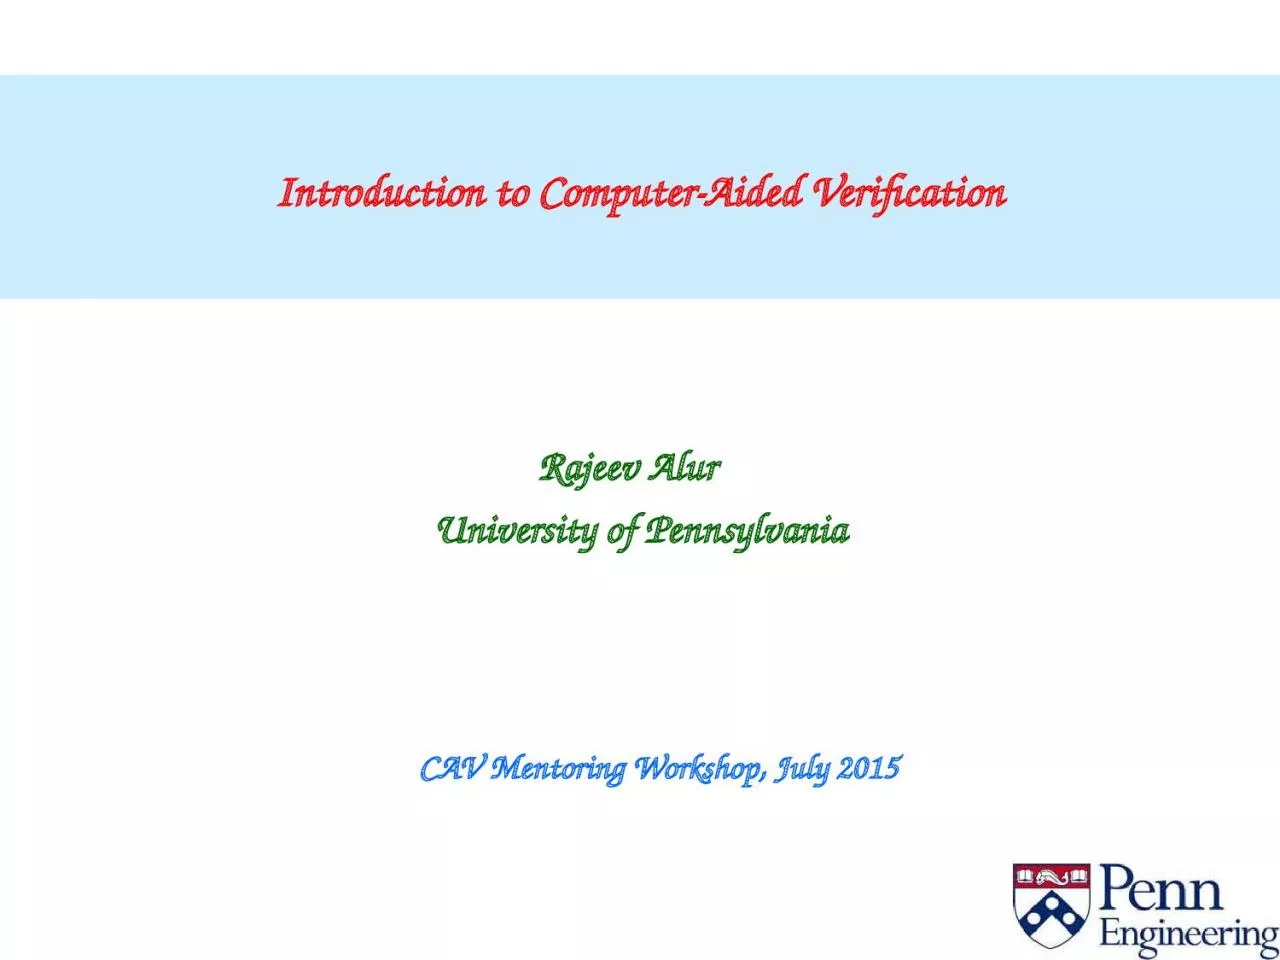 Introduction to Computer-Aided Verification